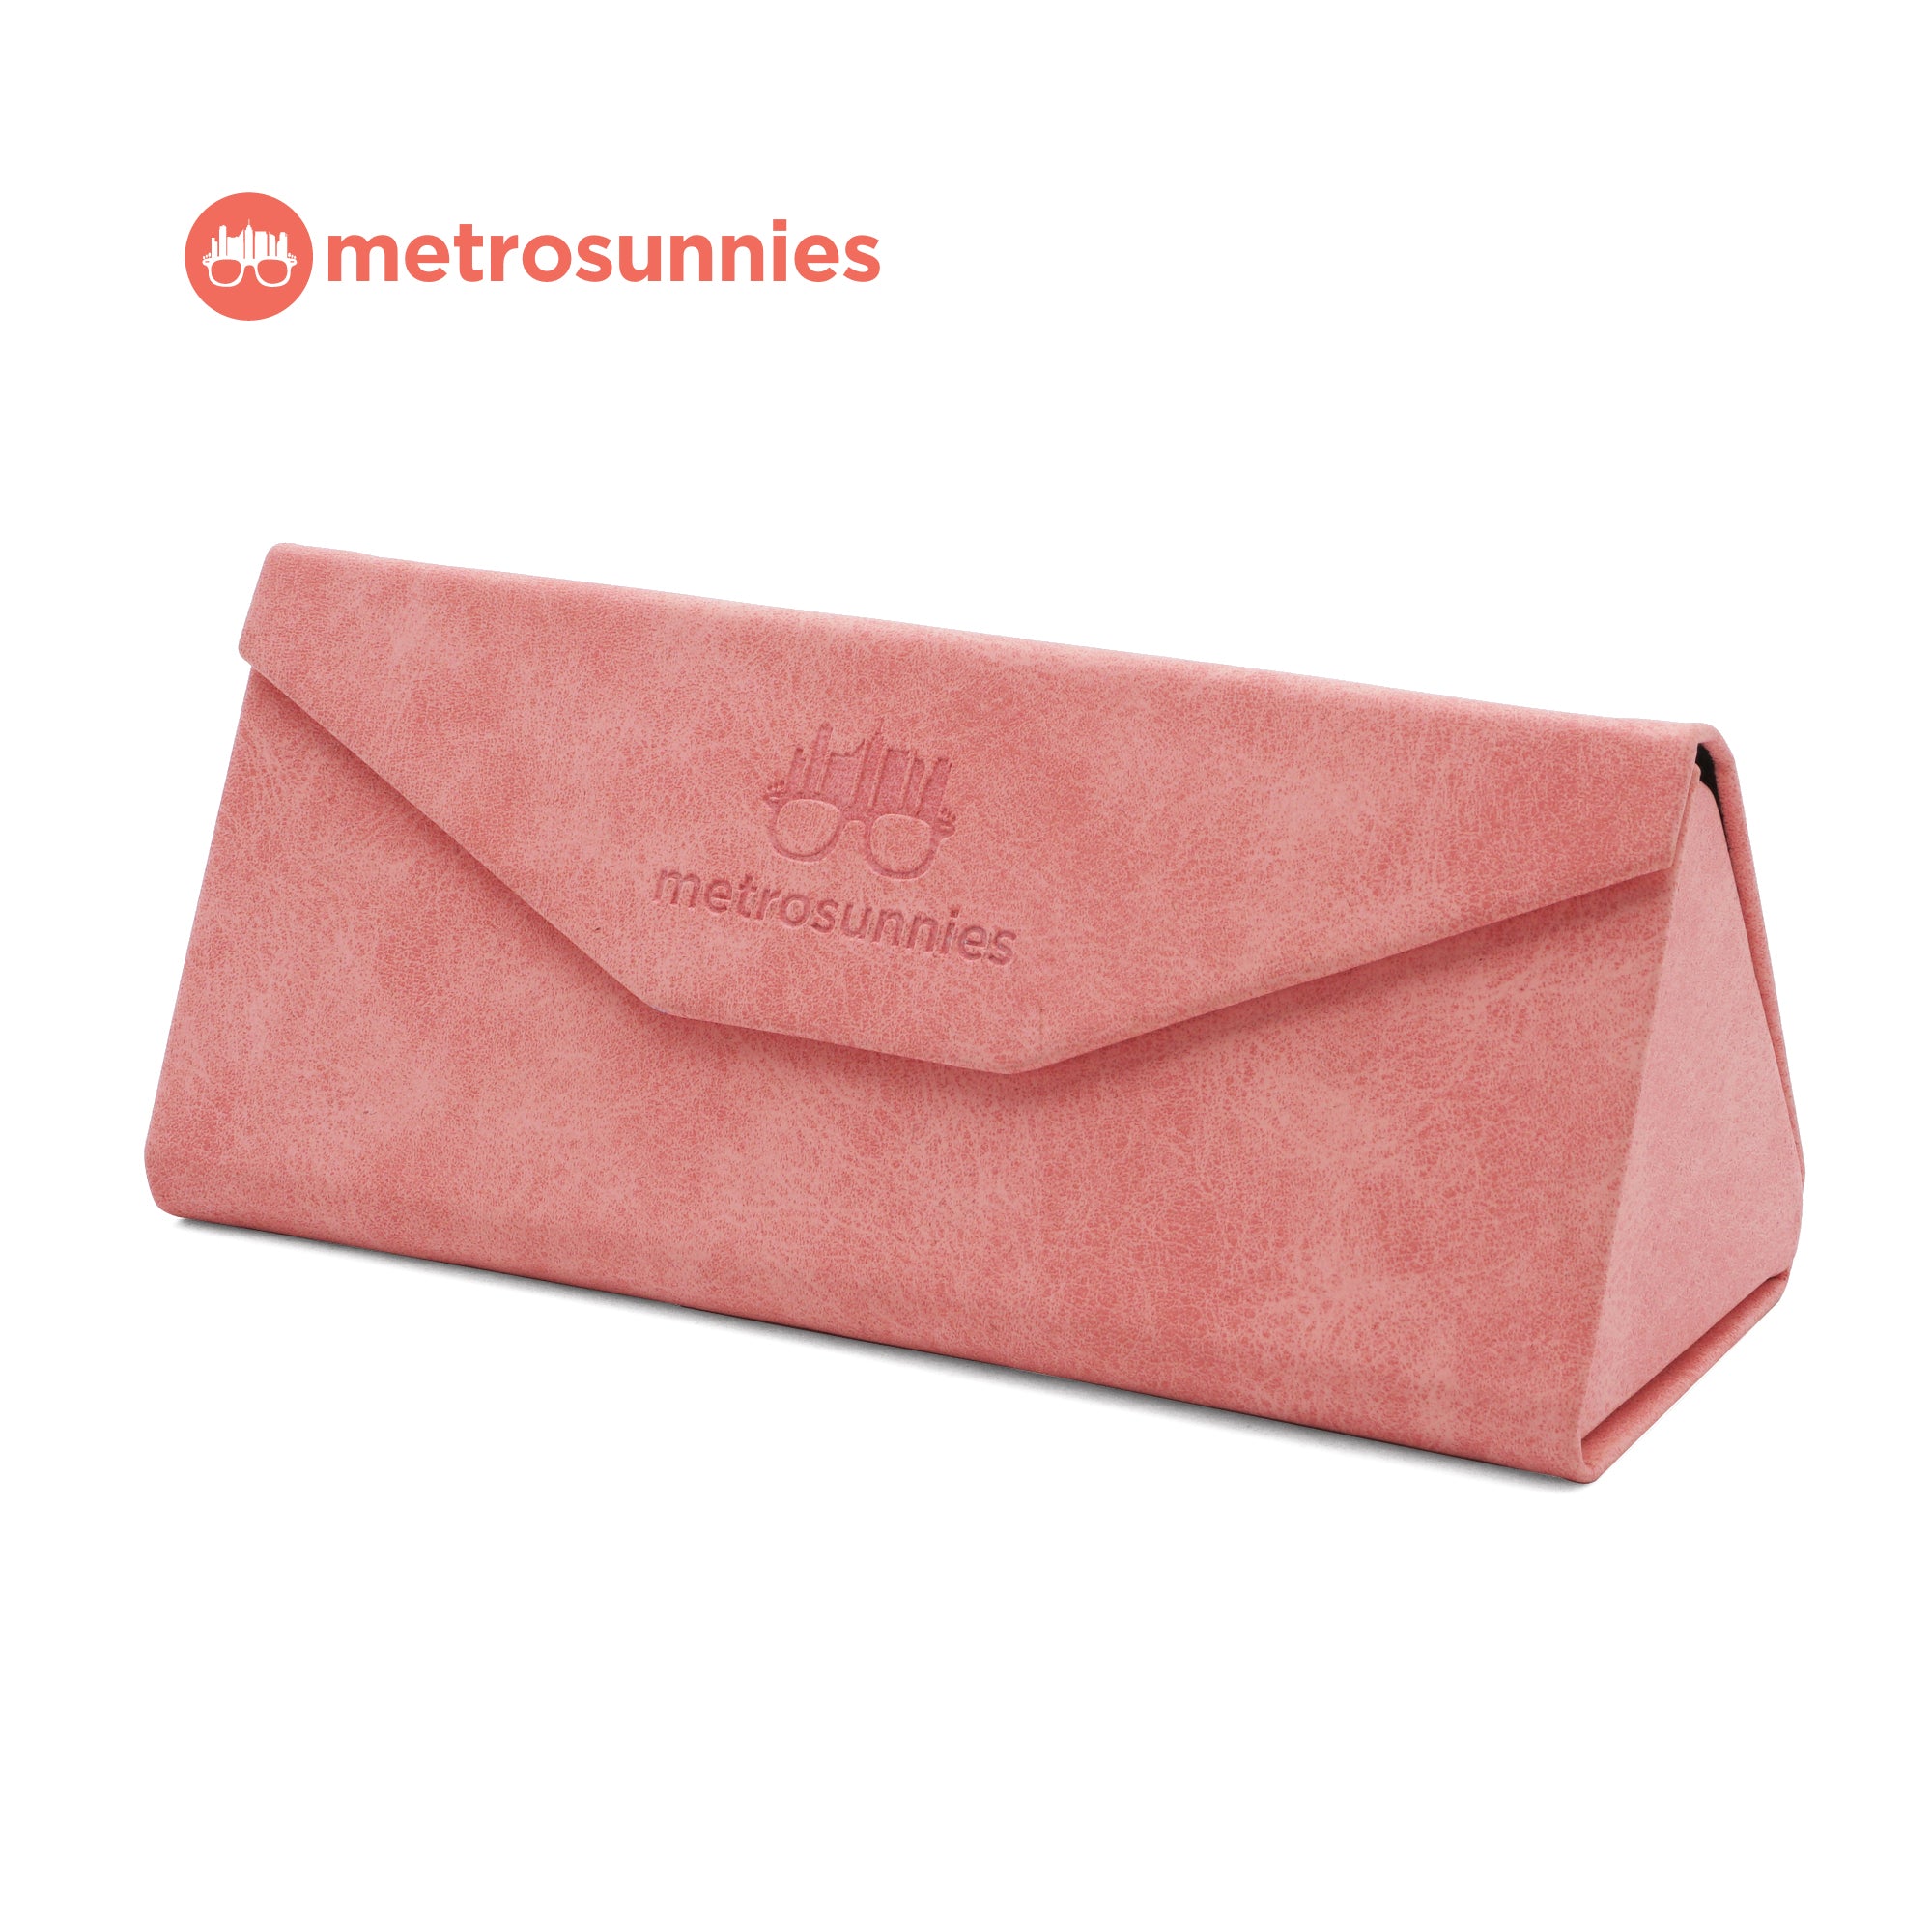 MetroSunnies Caddy Foldable Case Holder (Pink) / Eyewear Case Holder for Sunnies and Specs